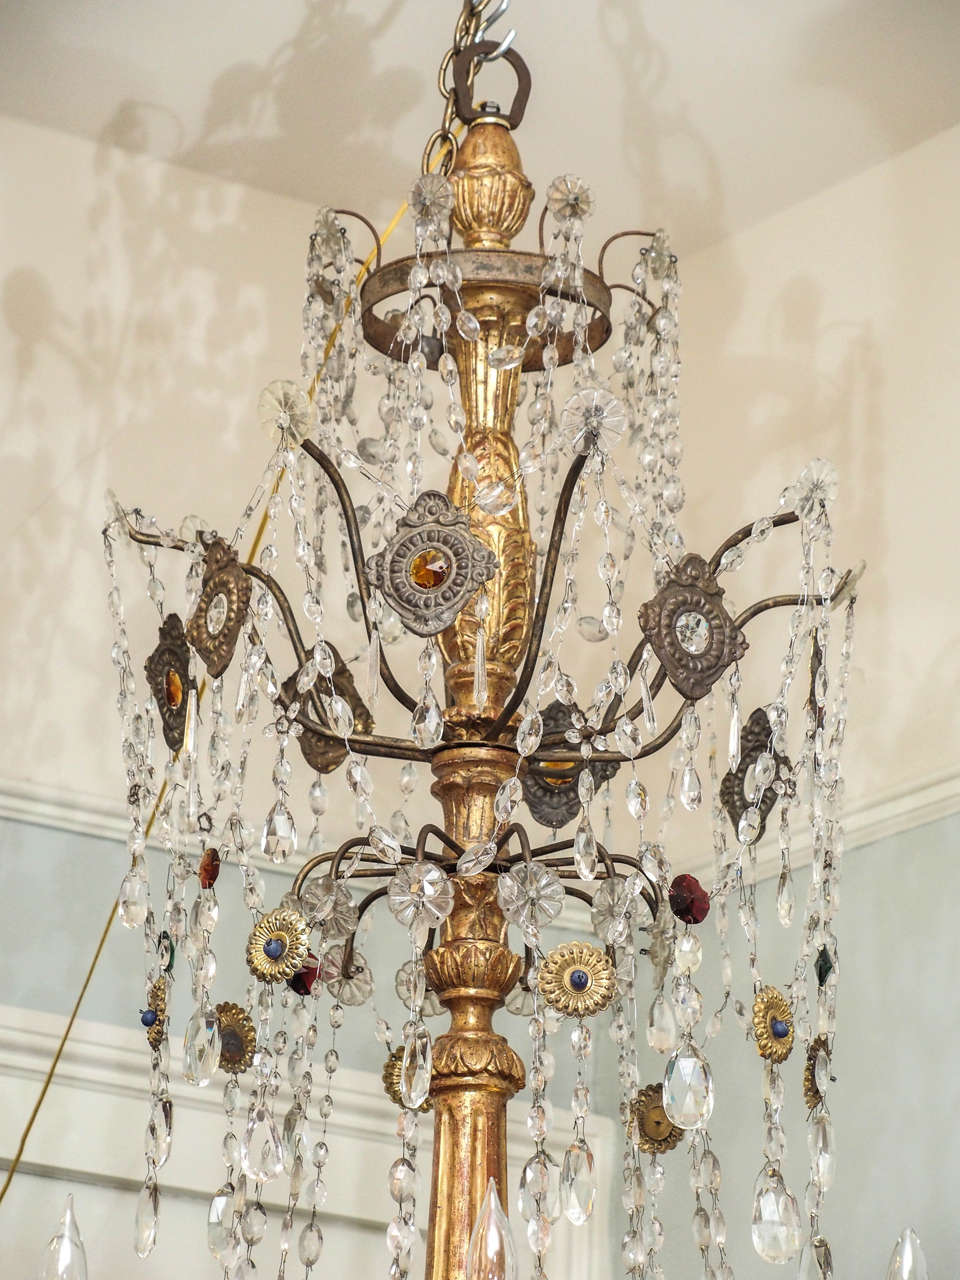 Italian Pair of 19th Century Genovese Giltwood, Iron and Crystal Twelve-Light Chandelier